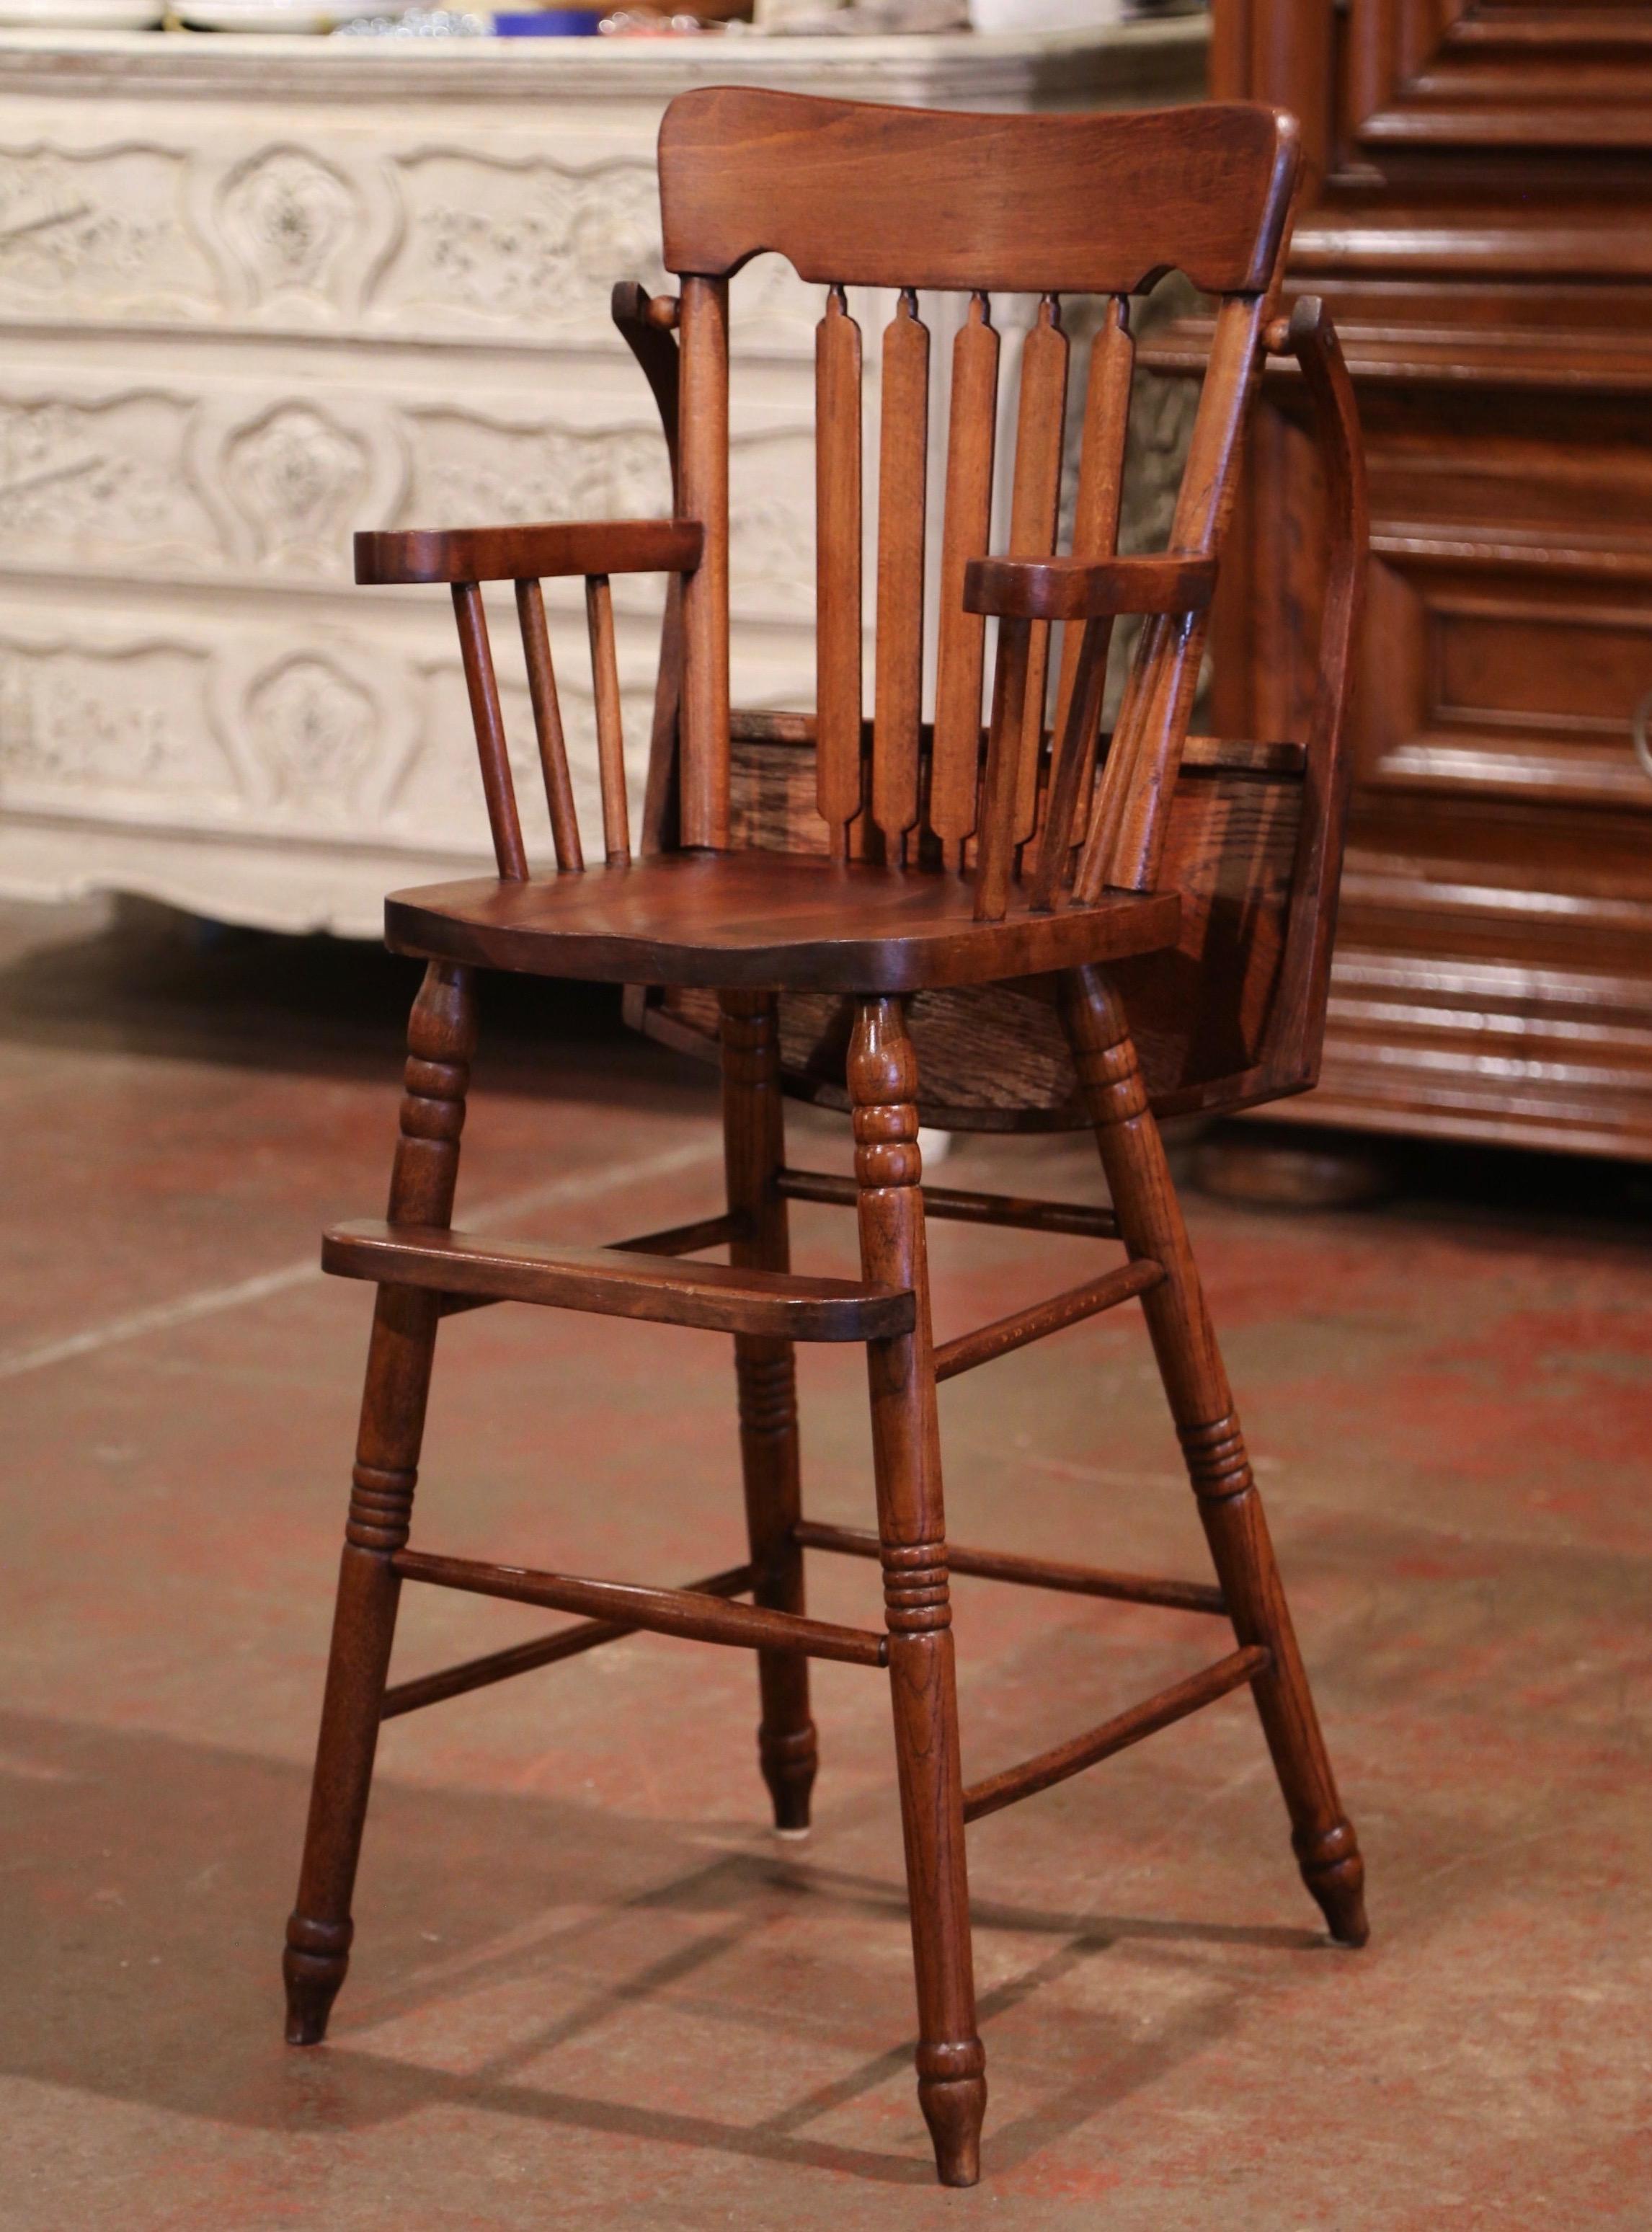 Art Deco Mid-20th Century English Carved Oak Ladder Back Child High Chair